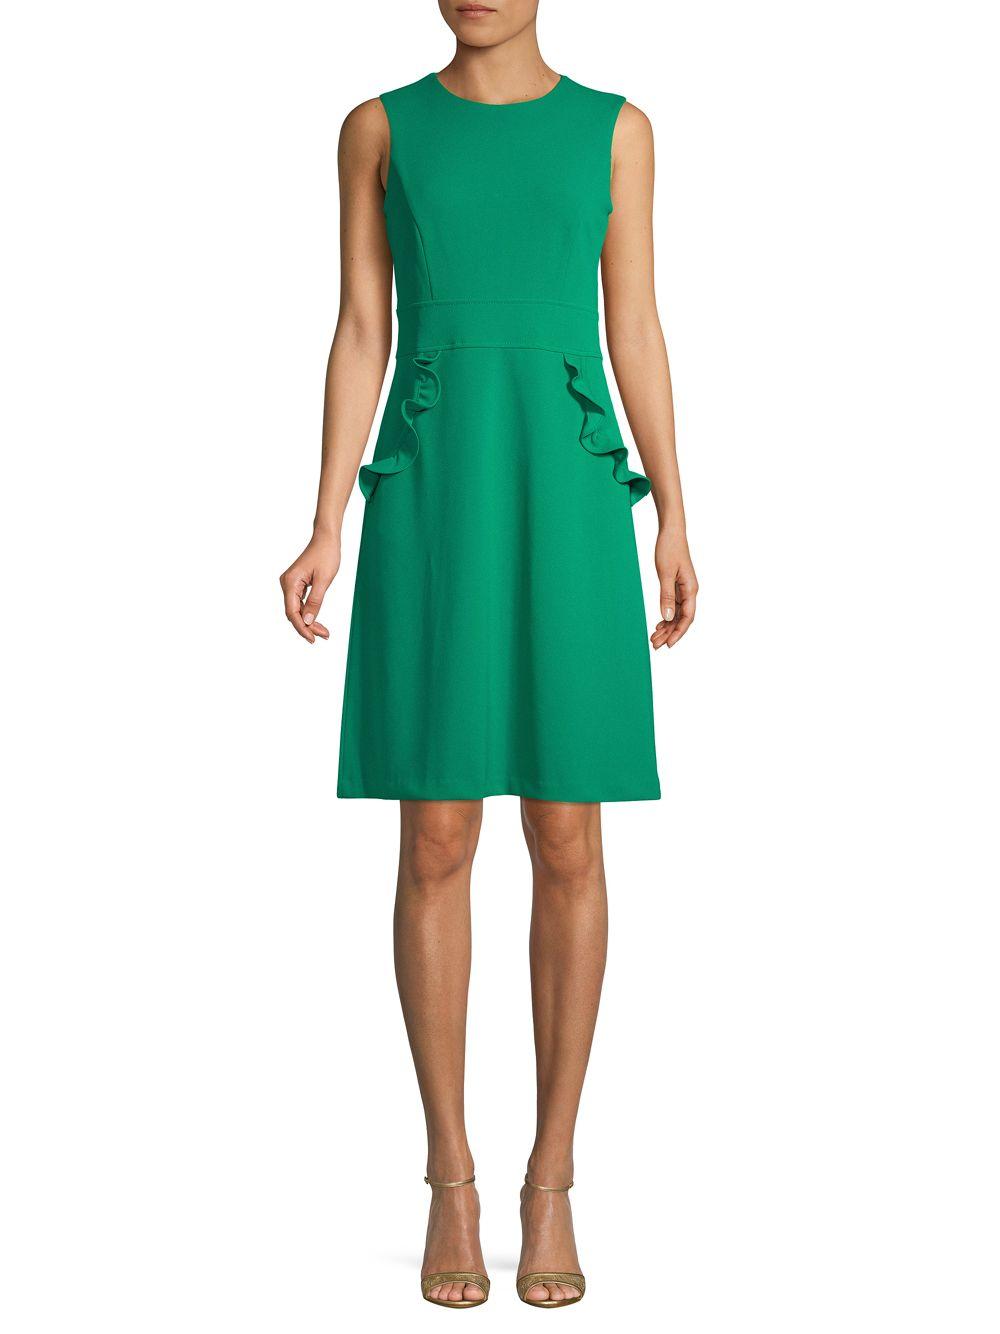 CALVIN KLEIN 205W39NYC Synthetic Ruffle Sleeveless A-line Dress in ...